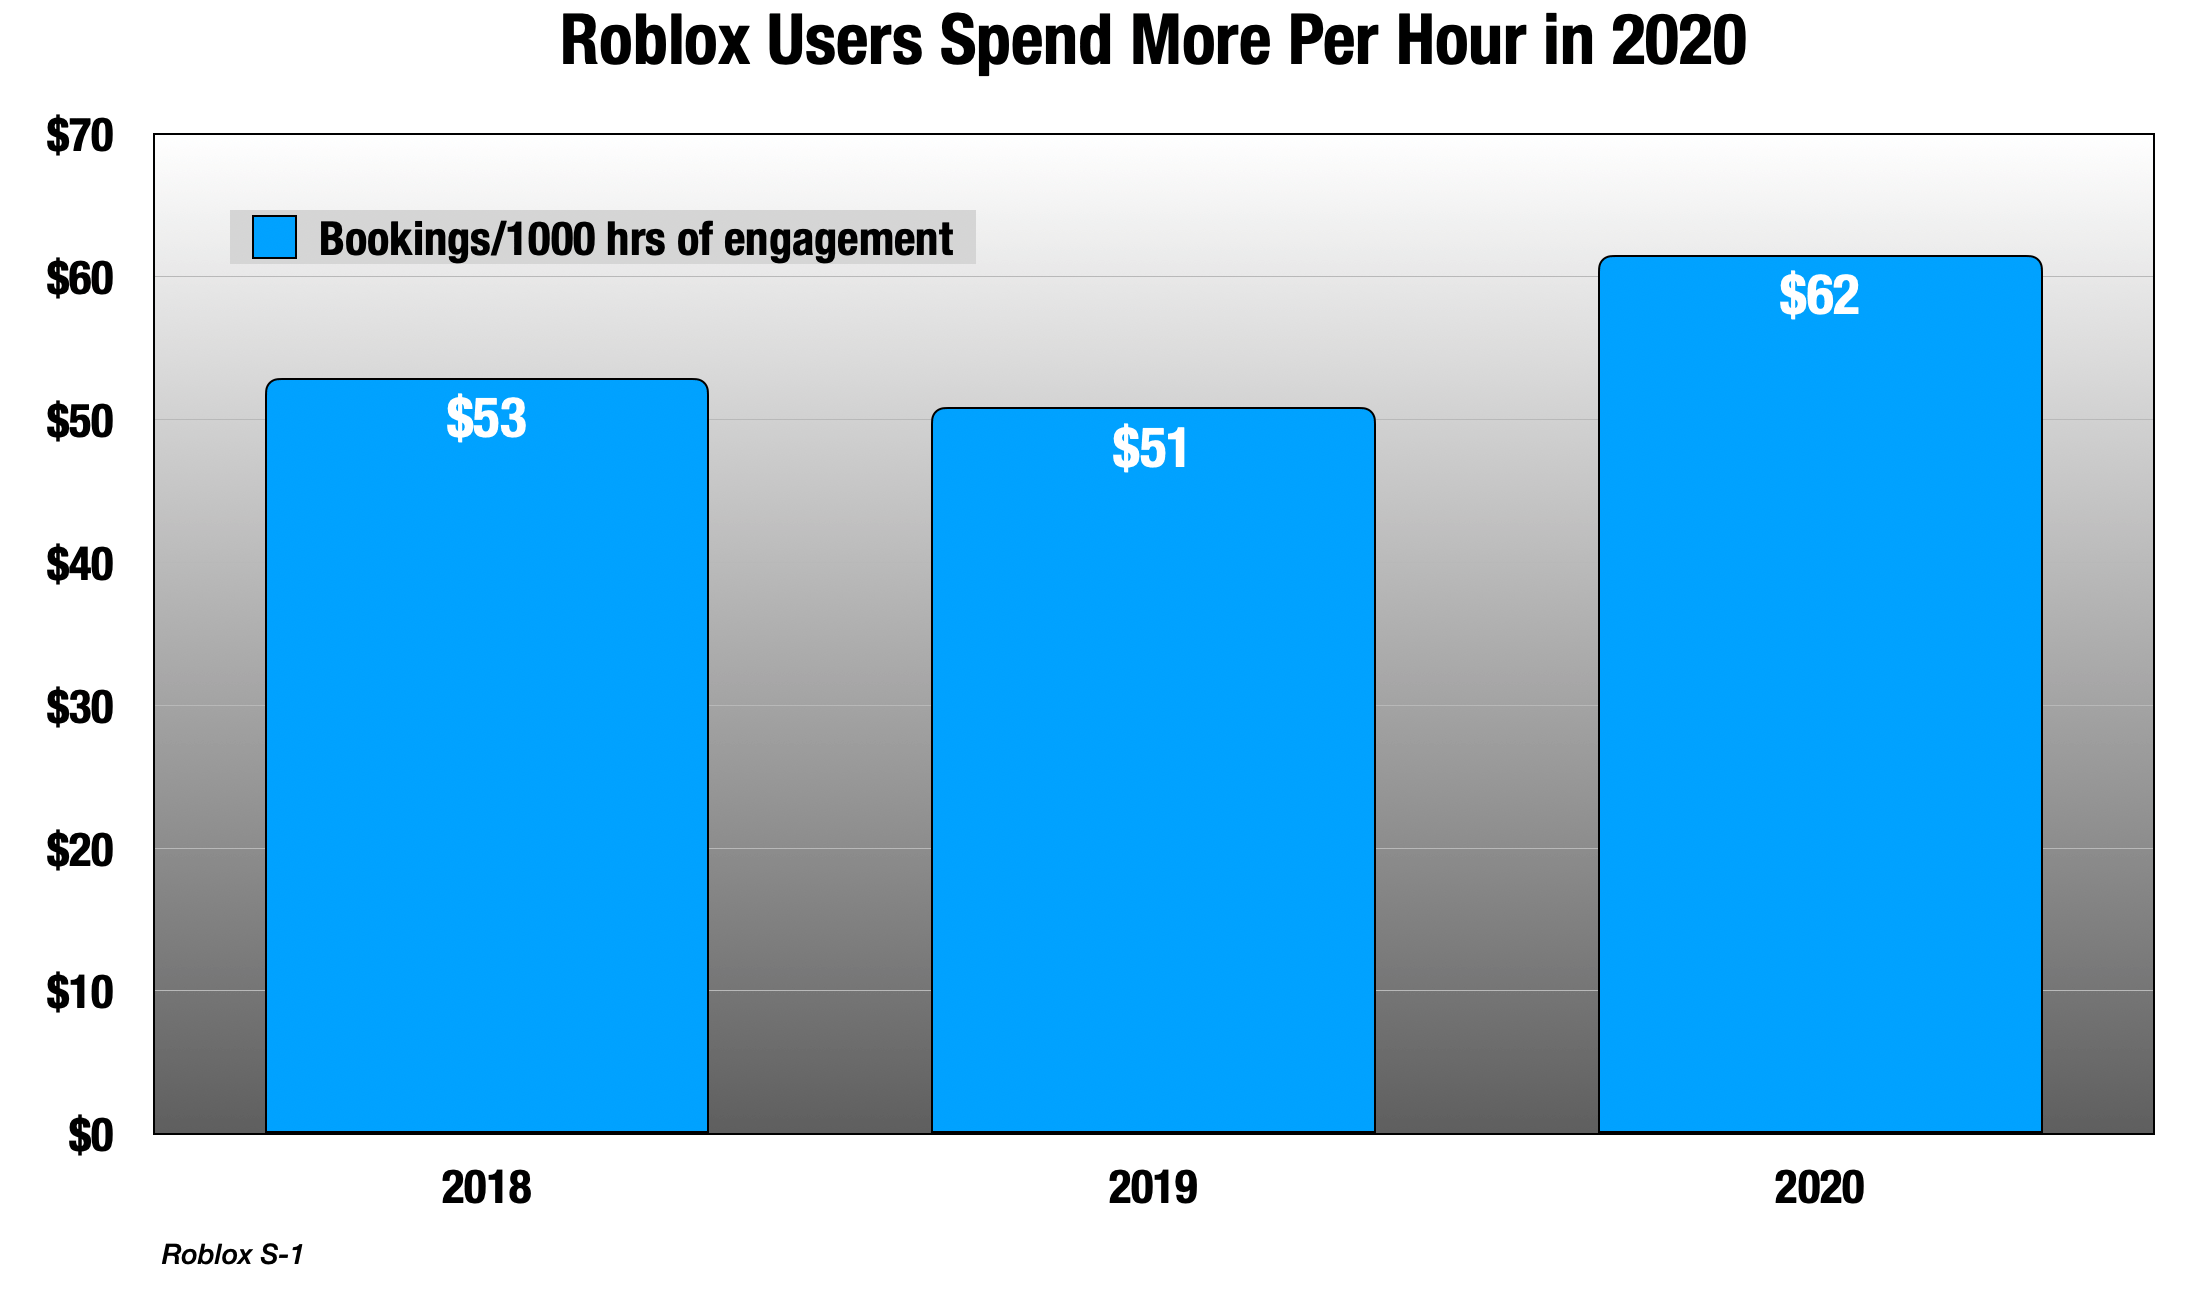 Roblox shares opened 15% up on Tuesday: here's the catalyst